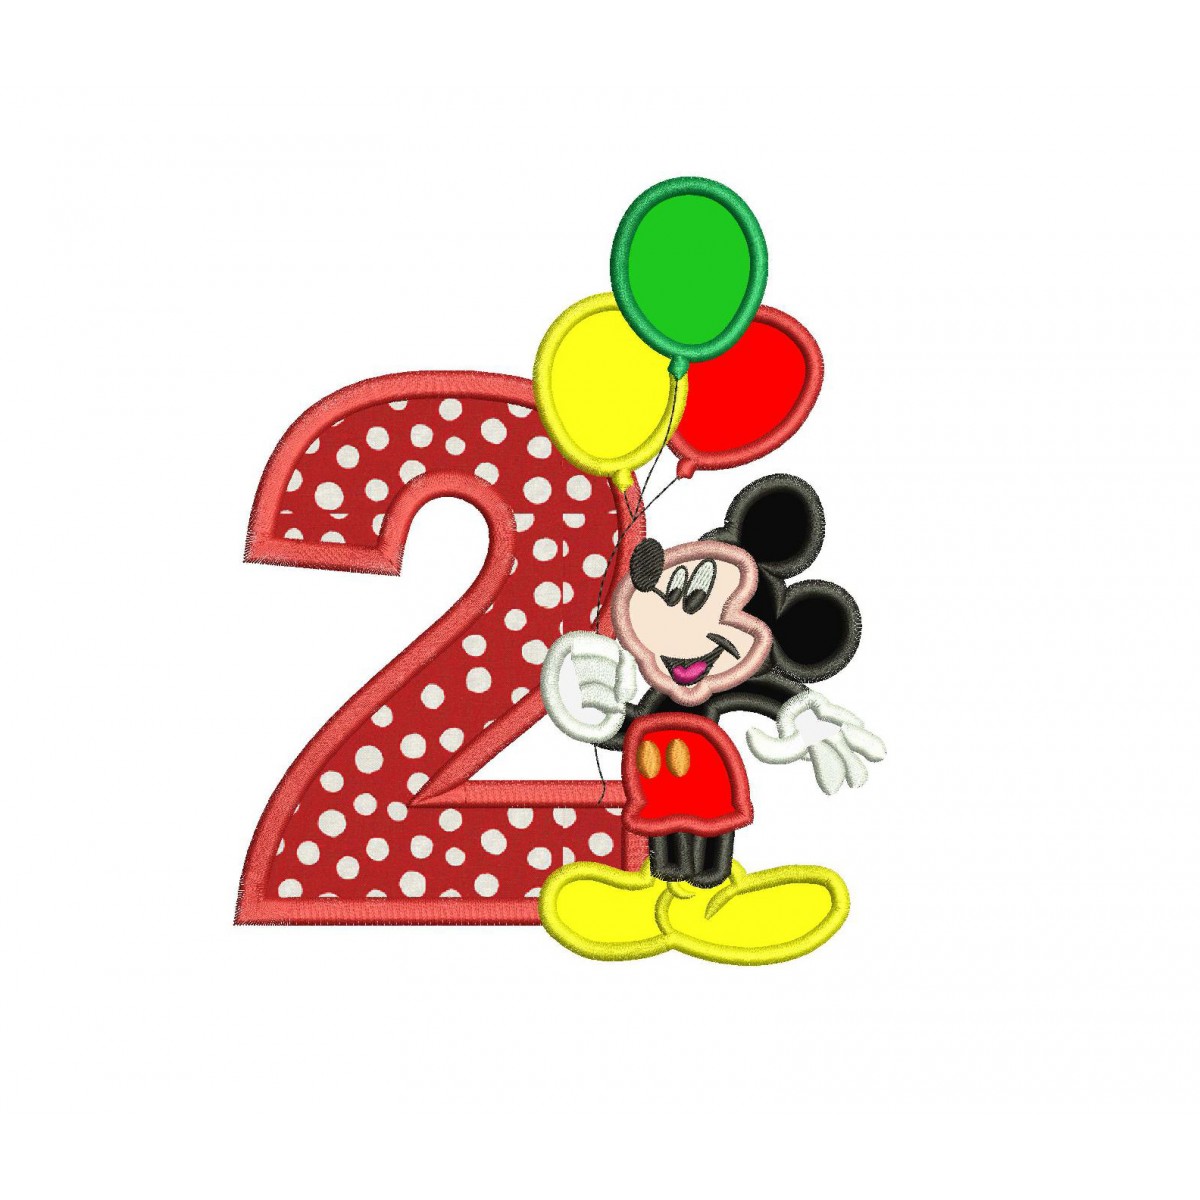 Mickey Mouse 2nd birthday Holding a Balloons Applique Design.